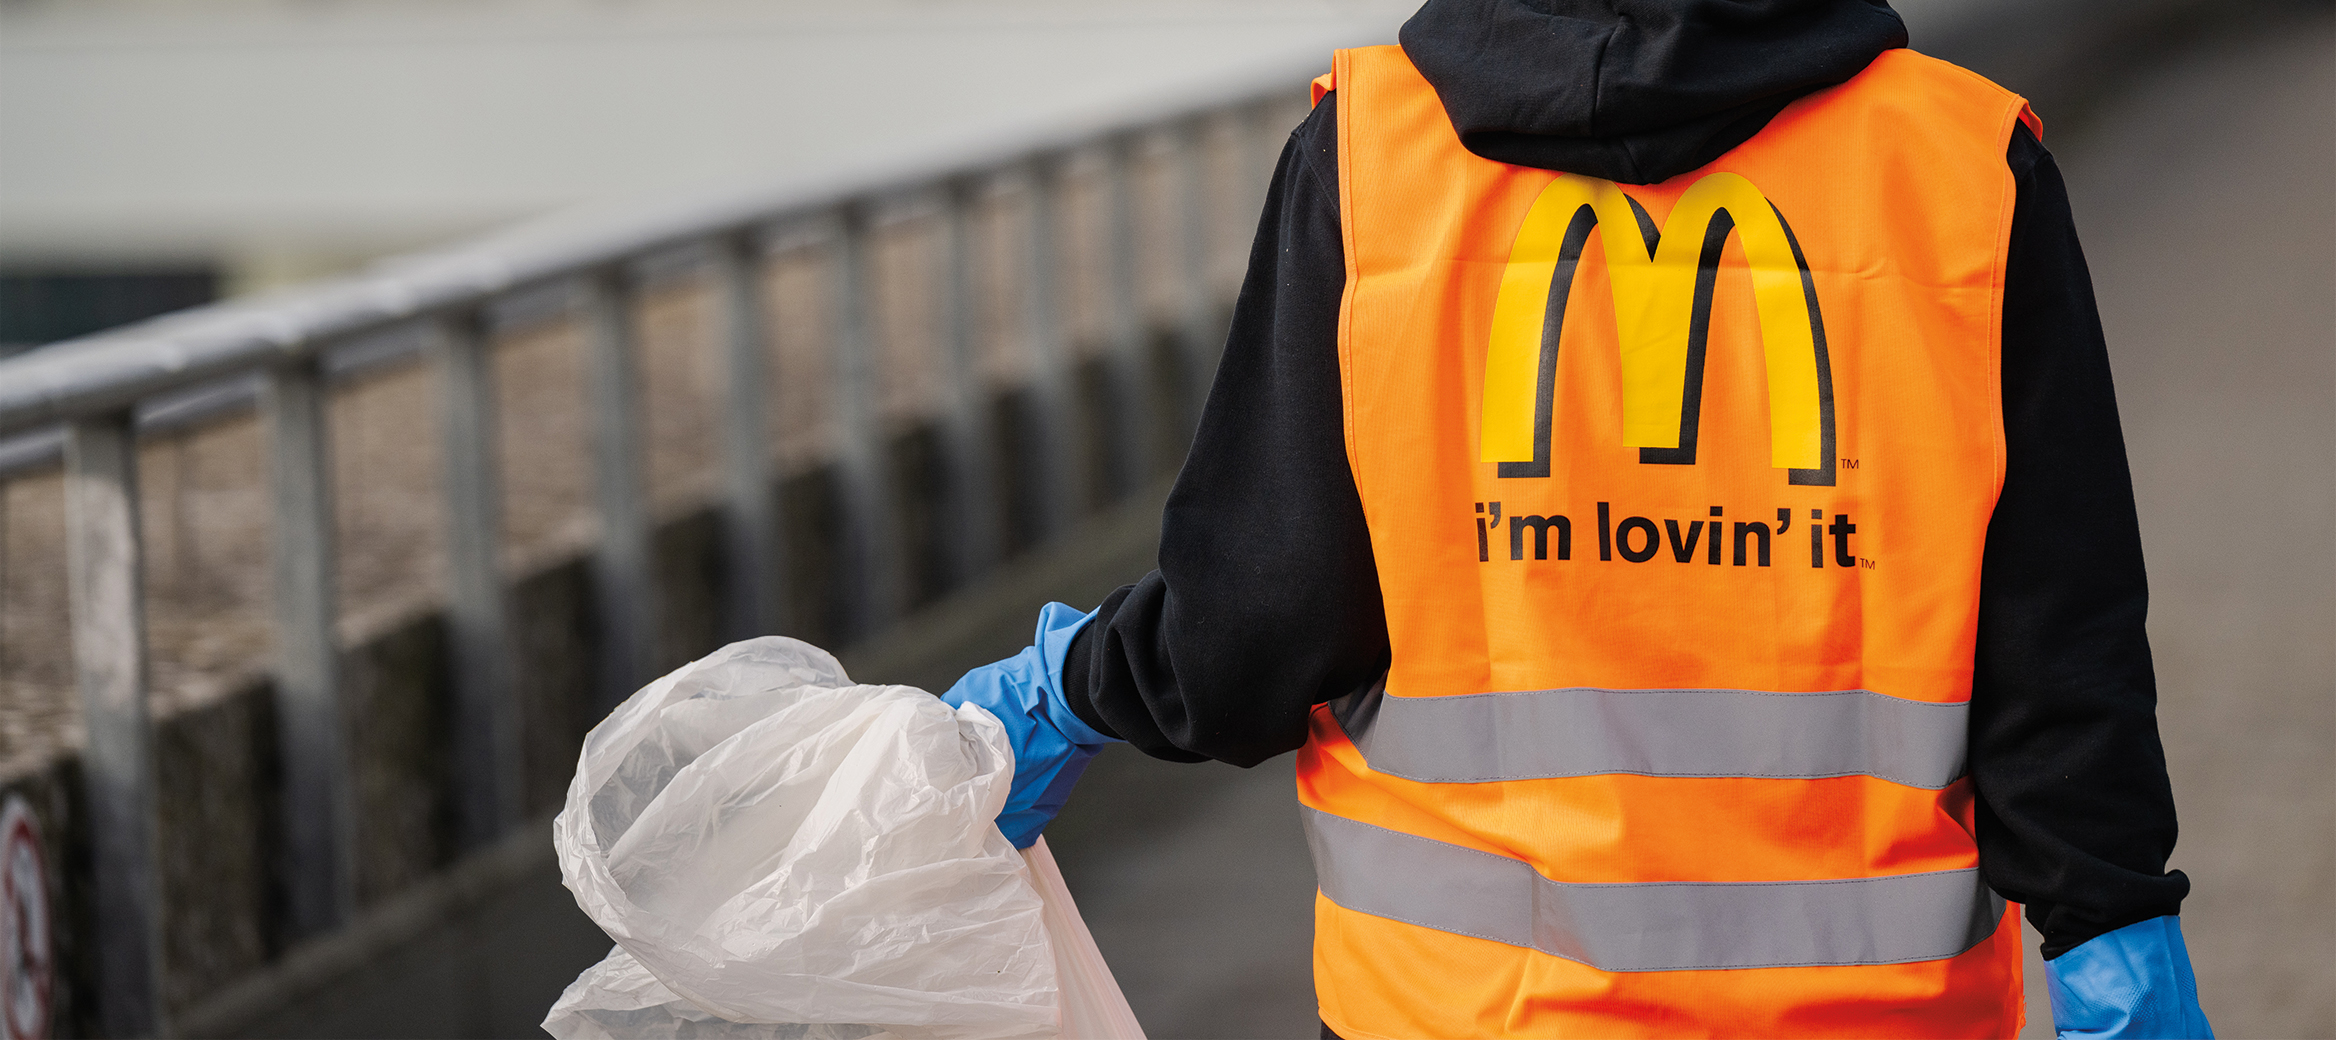  McDonalds Clean Up Day collaboratore